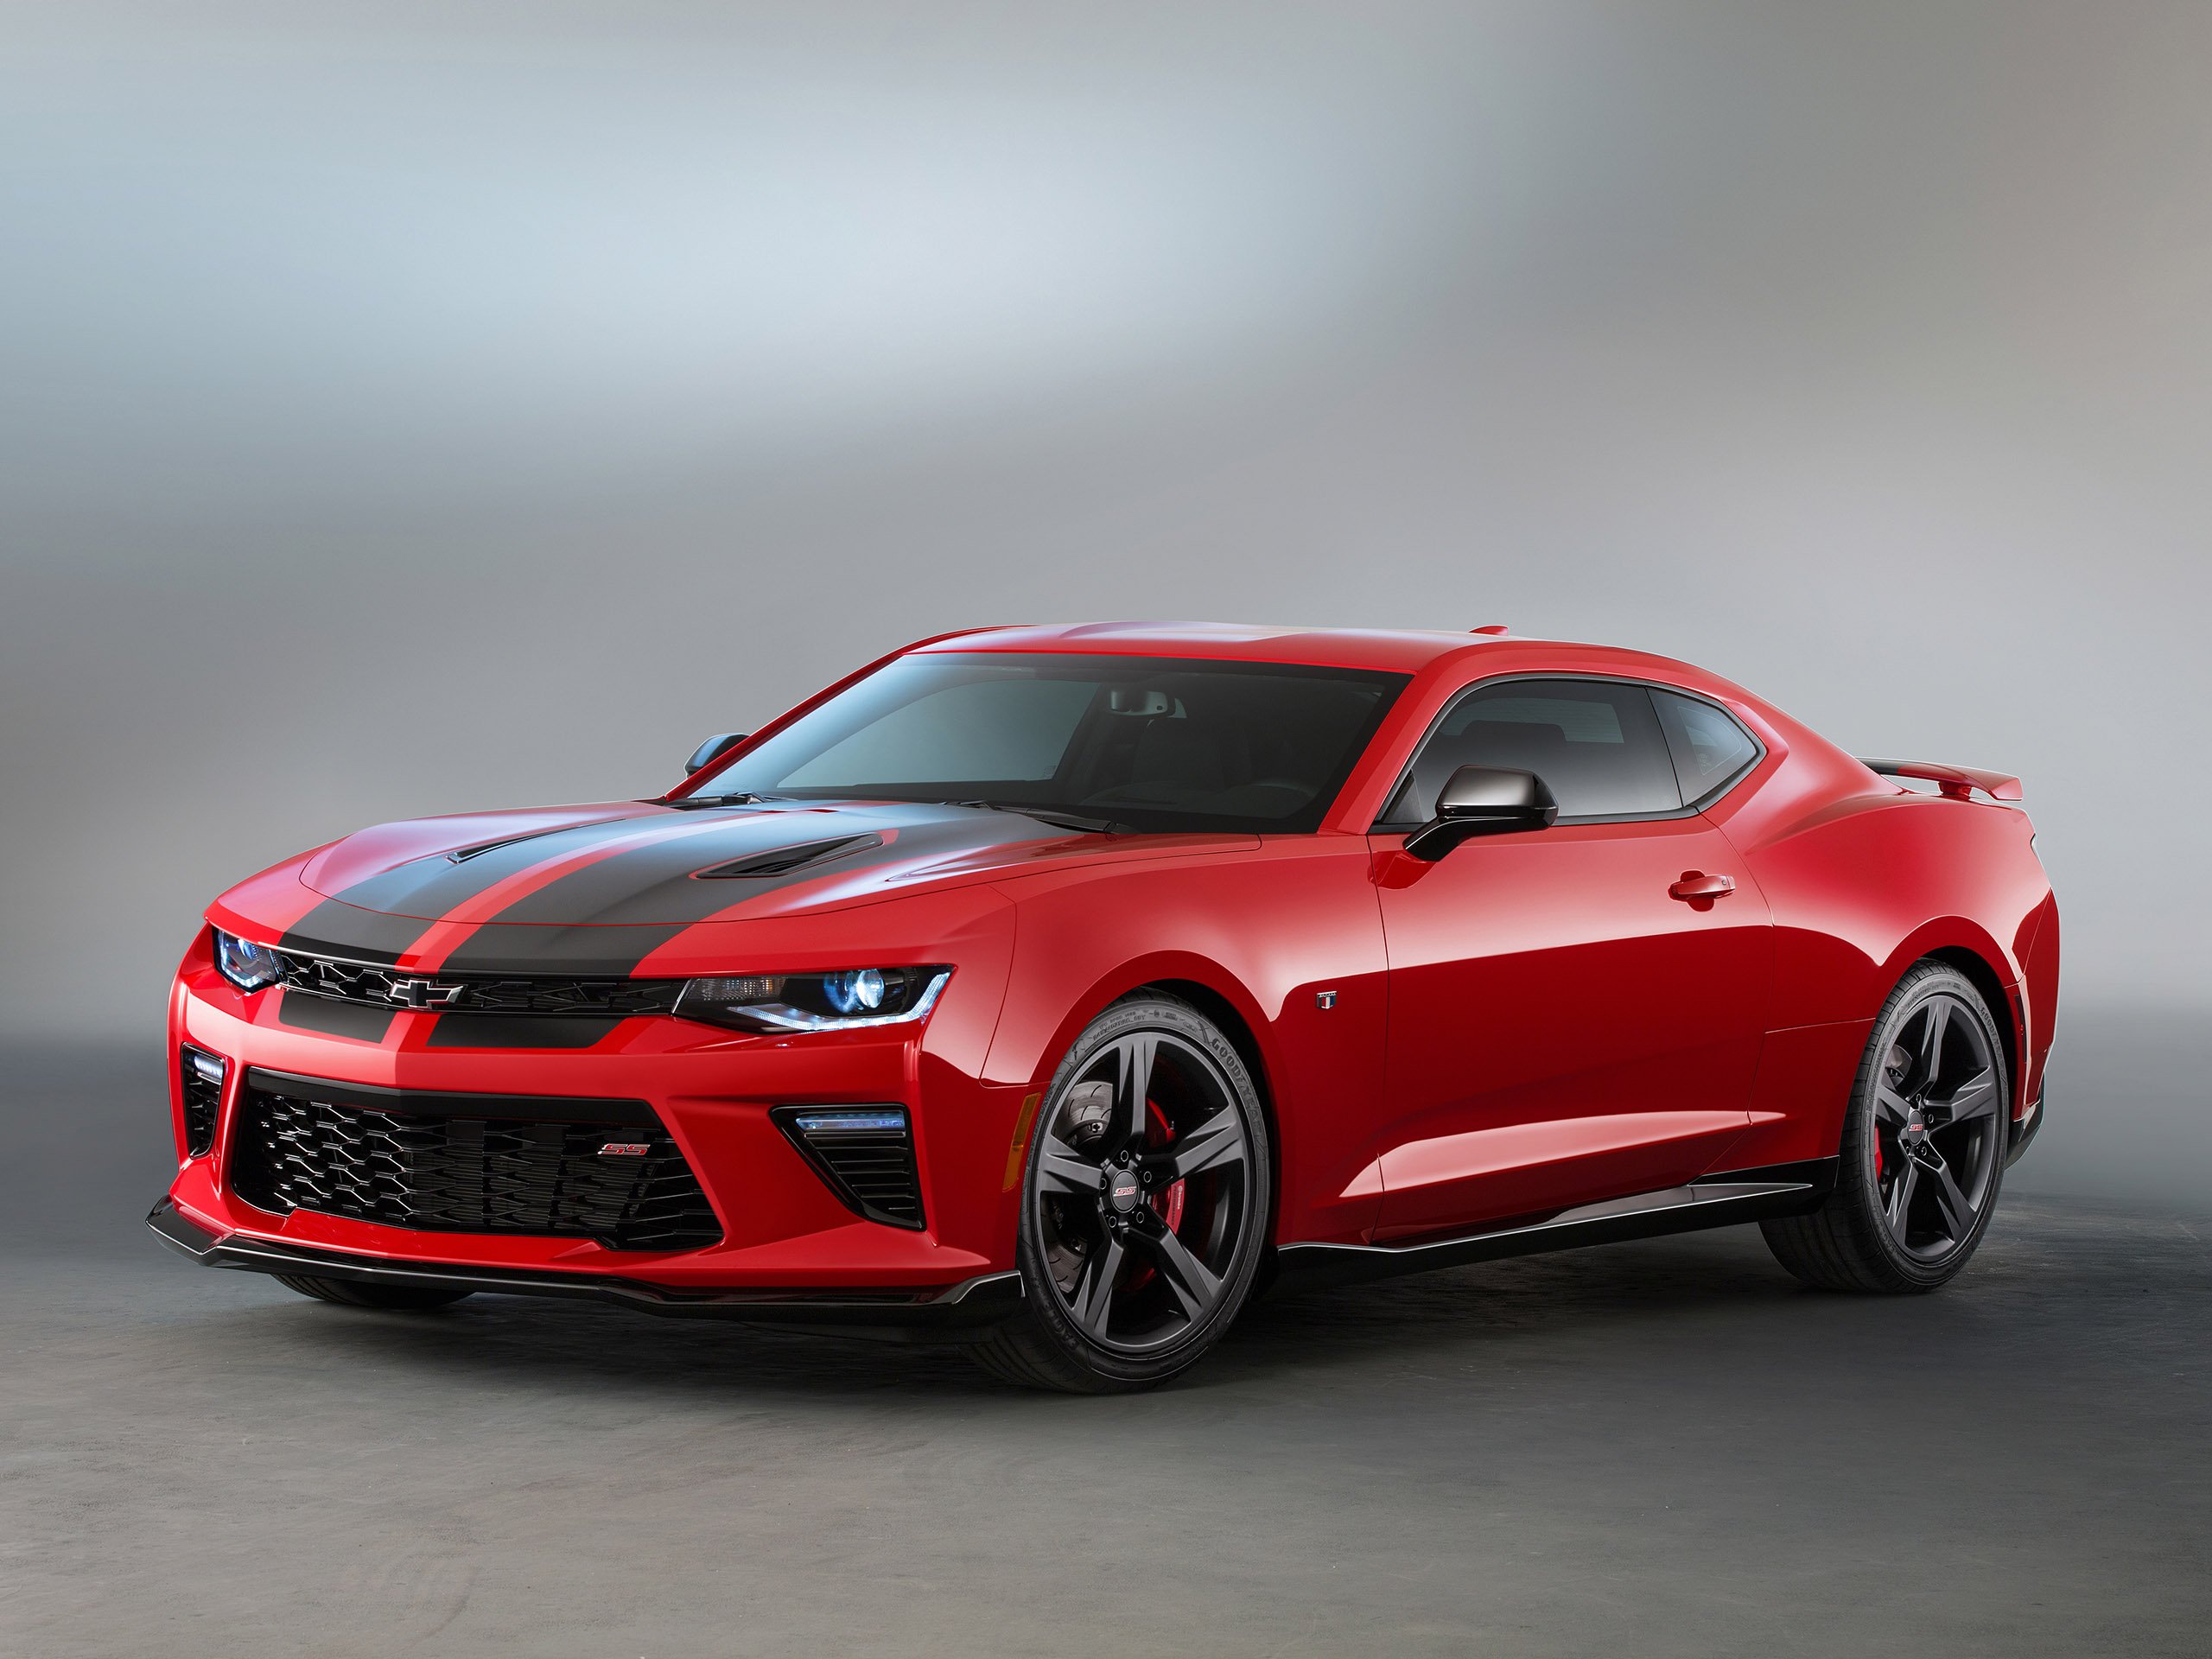 2015, Chevrolet, Camaro, S s, Black, Accent, Package, Concept, Muscle Wallpaper